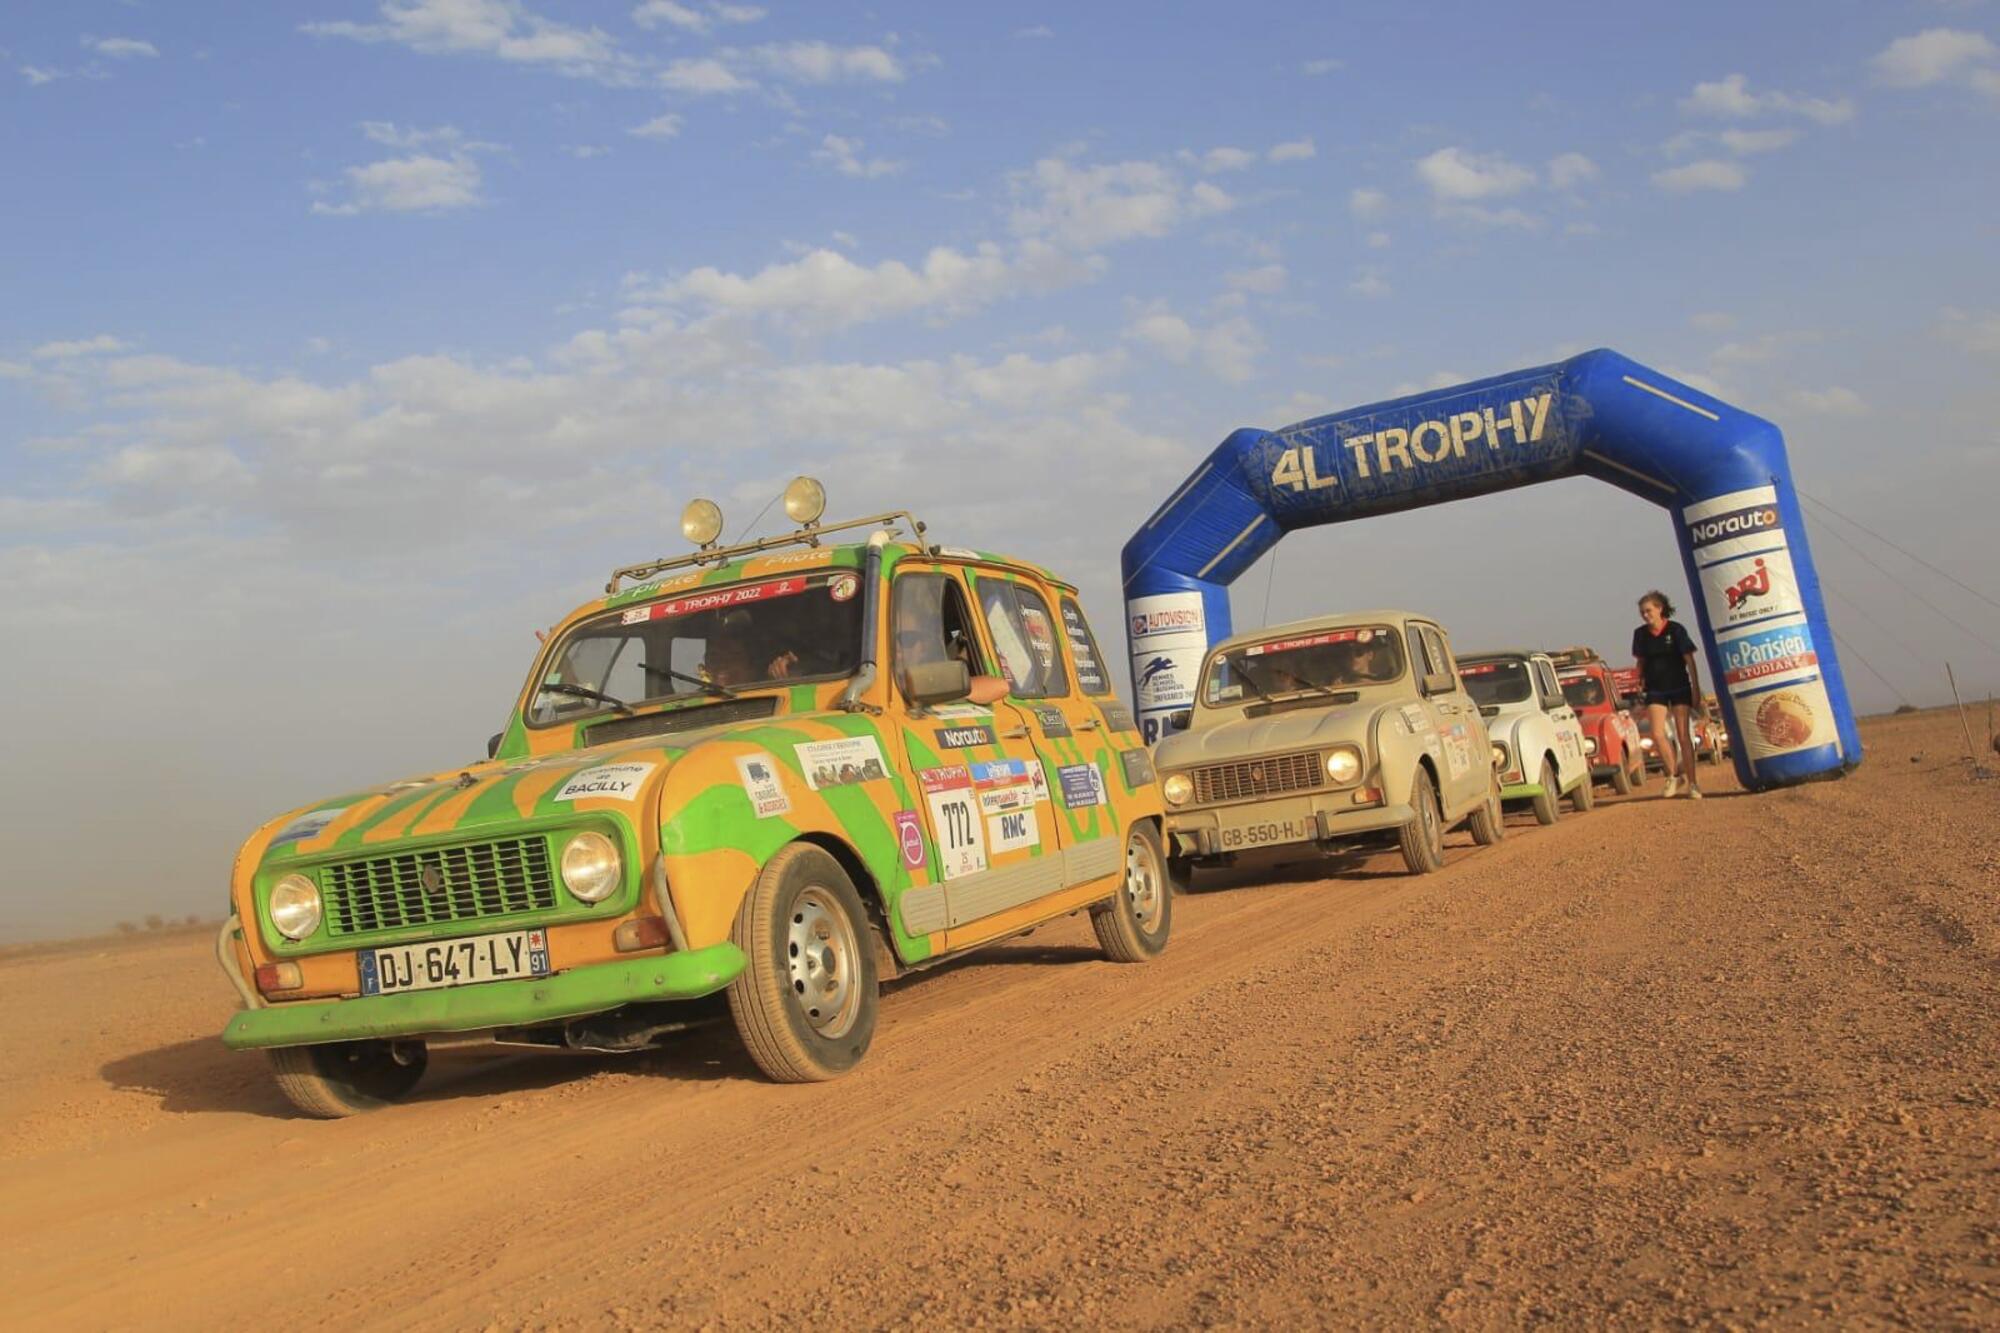 Mélanie and Harmony share their experience competing in this year’s 4L Trophy rally in a Renault 4